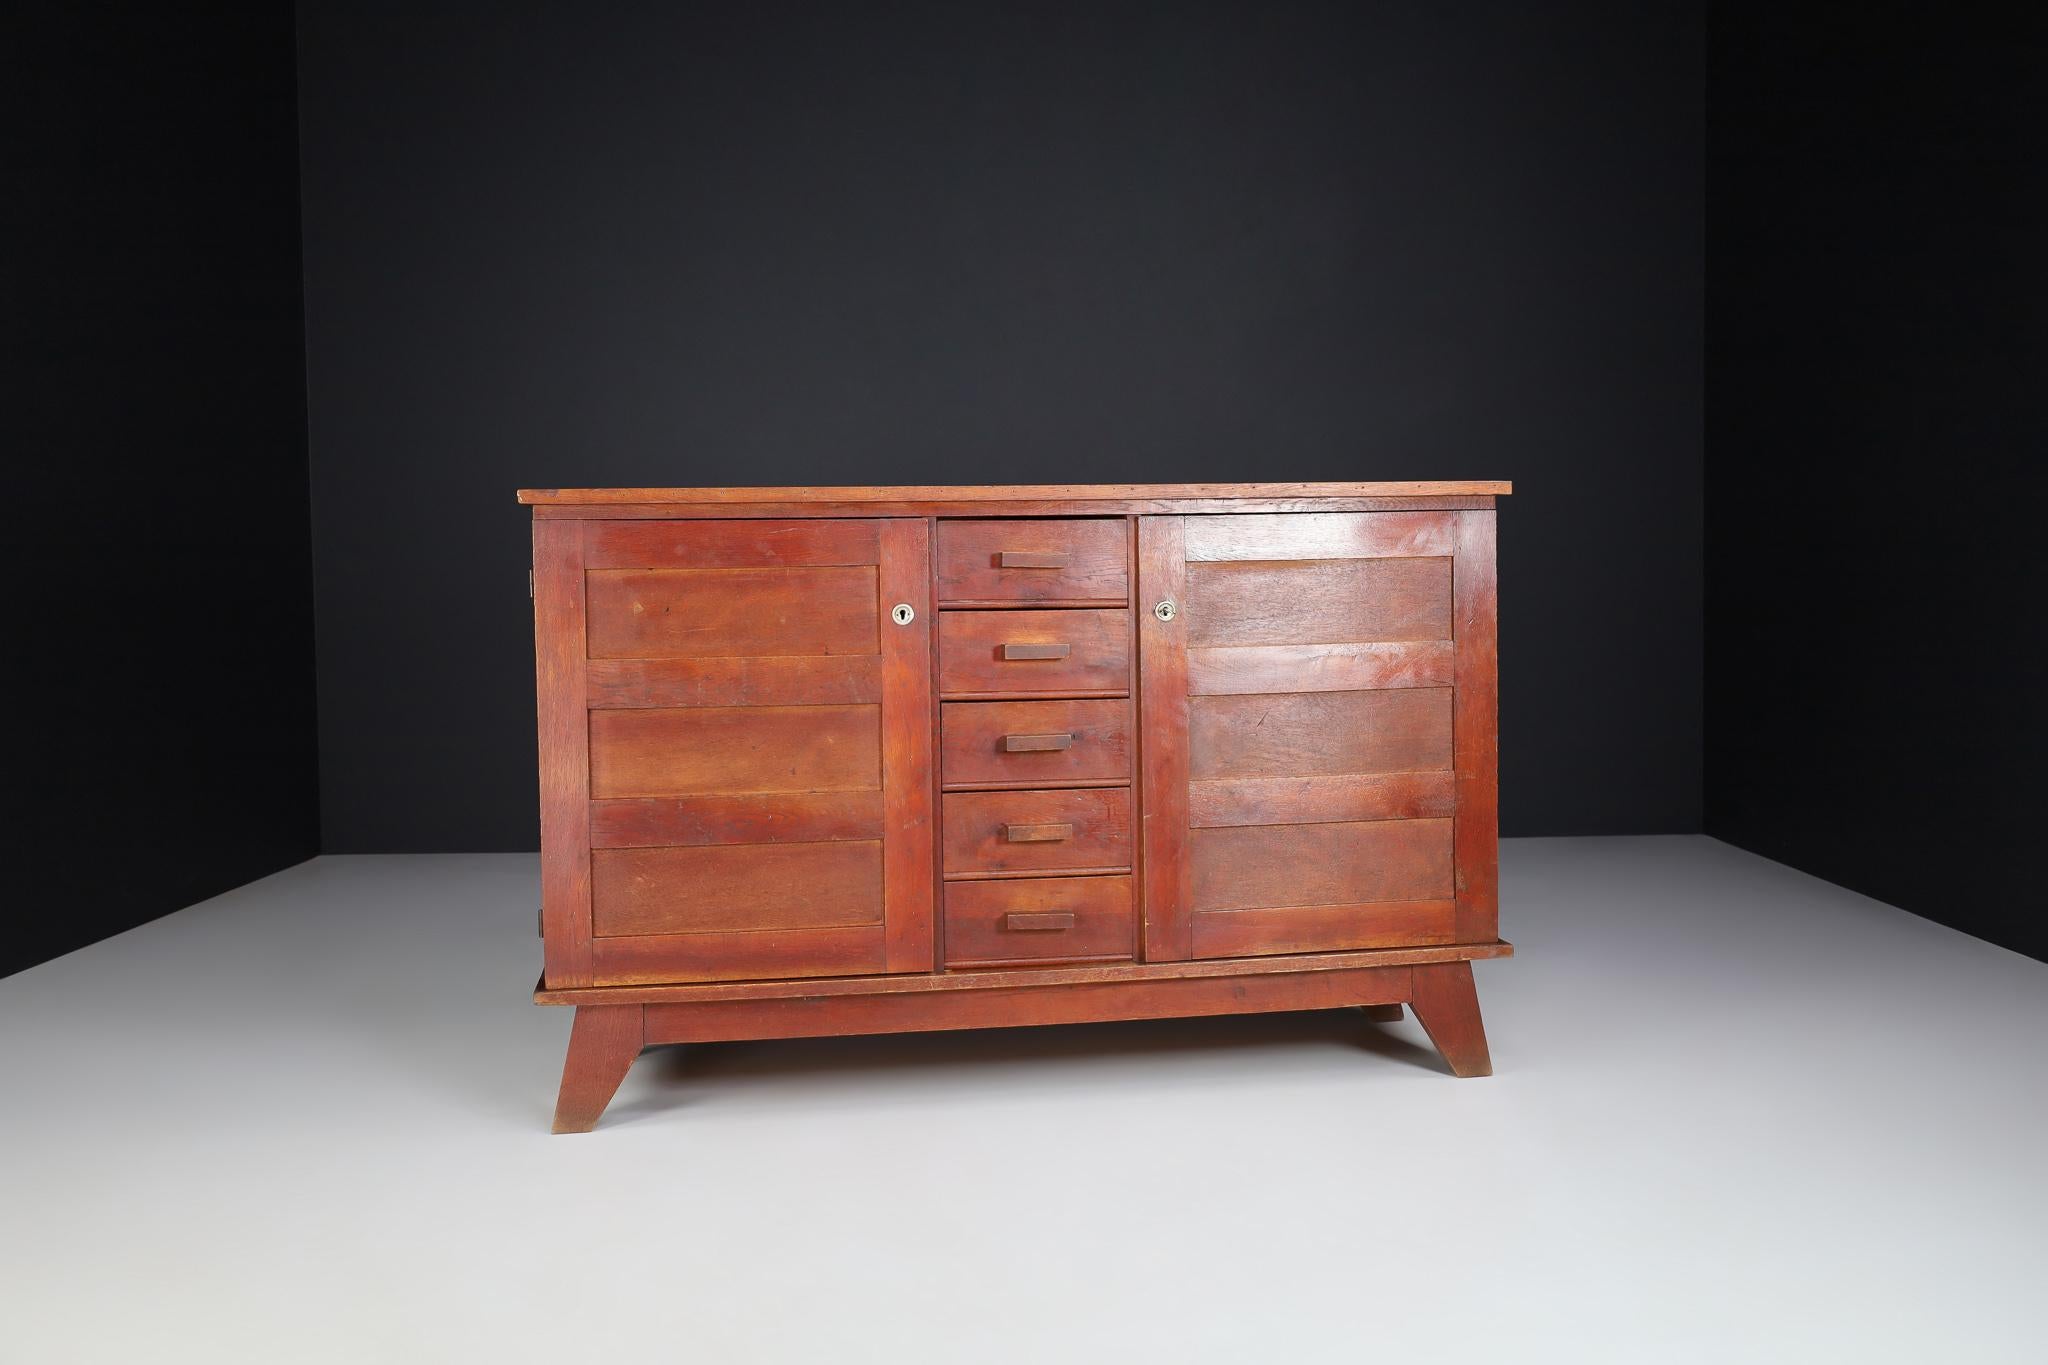 Midcentury sideboard in patinated French oak by René Gabriel, France, 1940s

Published in 1944 and designed by René Gabriel, this sideboard dates back to the 1940s and is a typical example of so-called reconstruction furniture. The design of